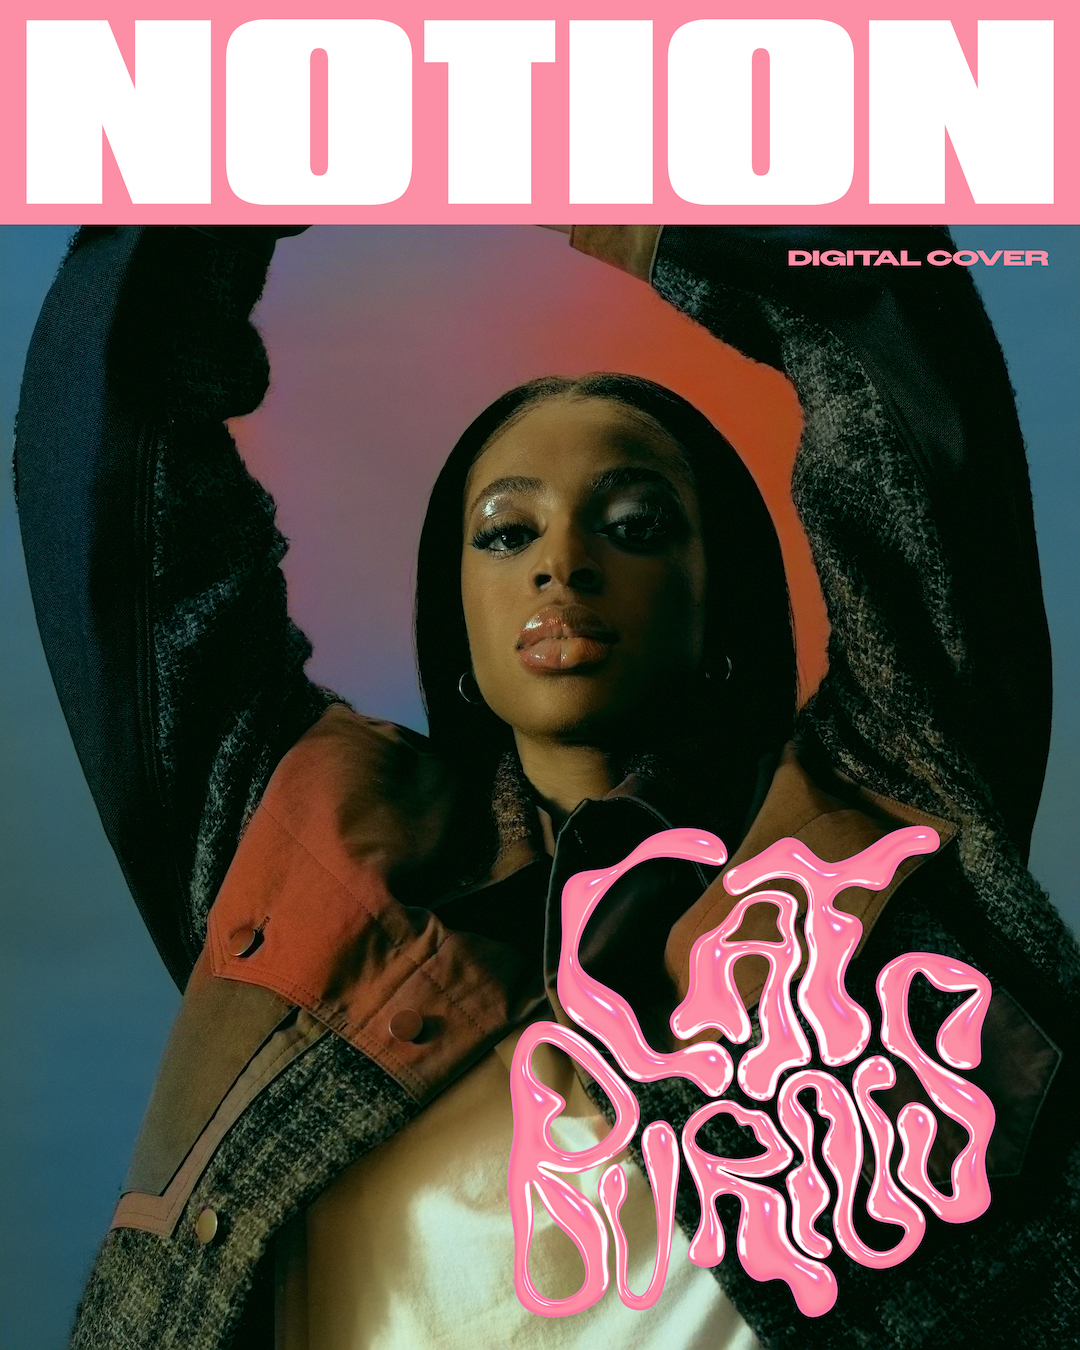 Digital Cover: Cat Burns Is the Pop Voice of the Next Generation